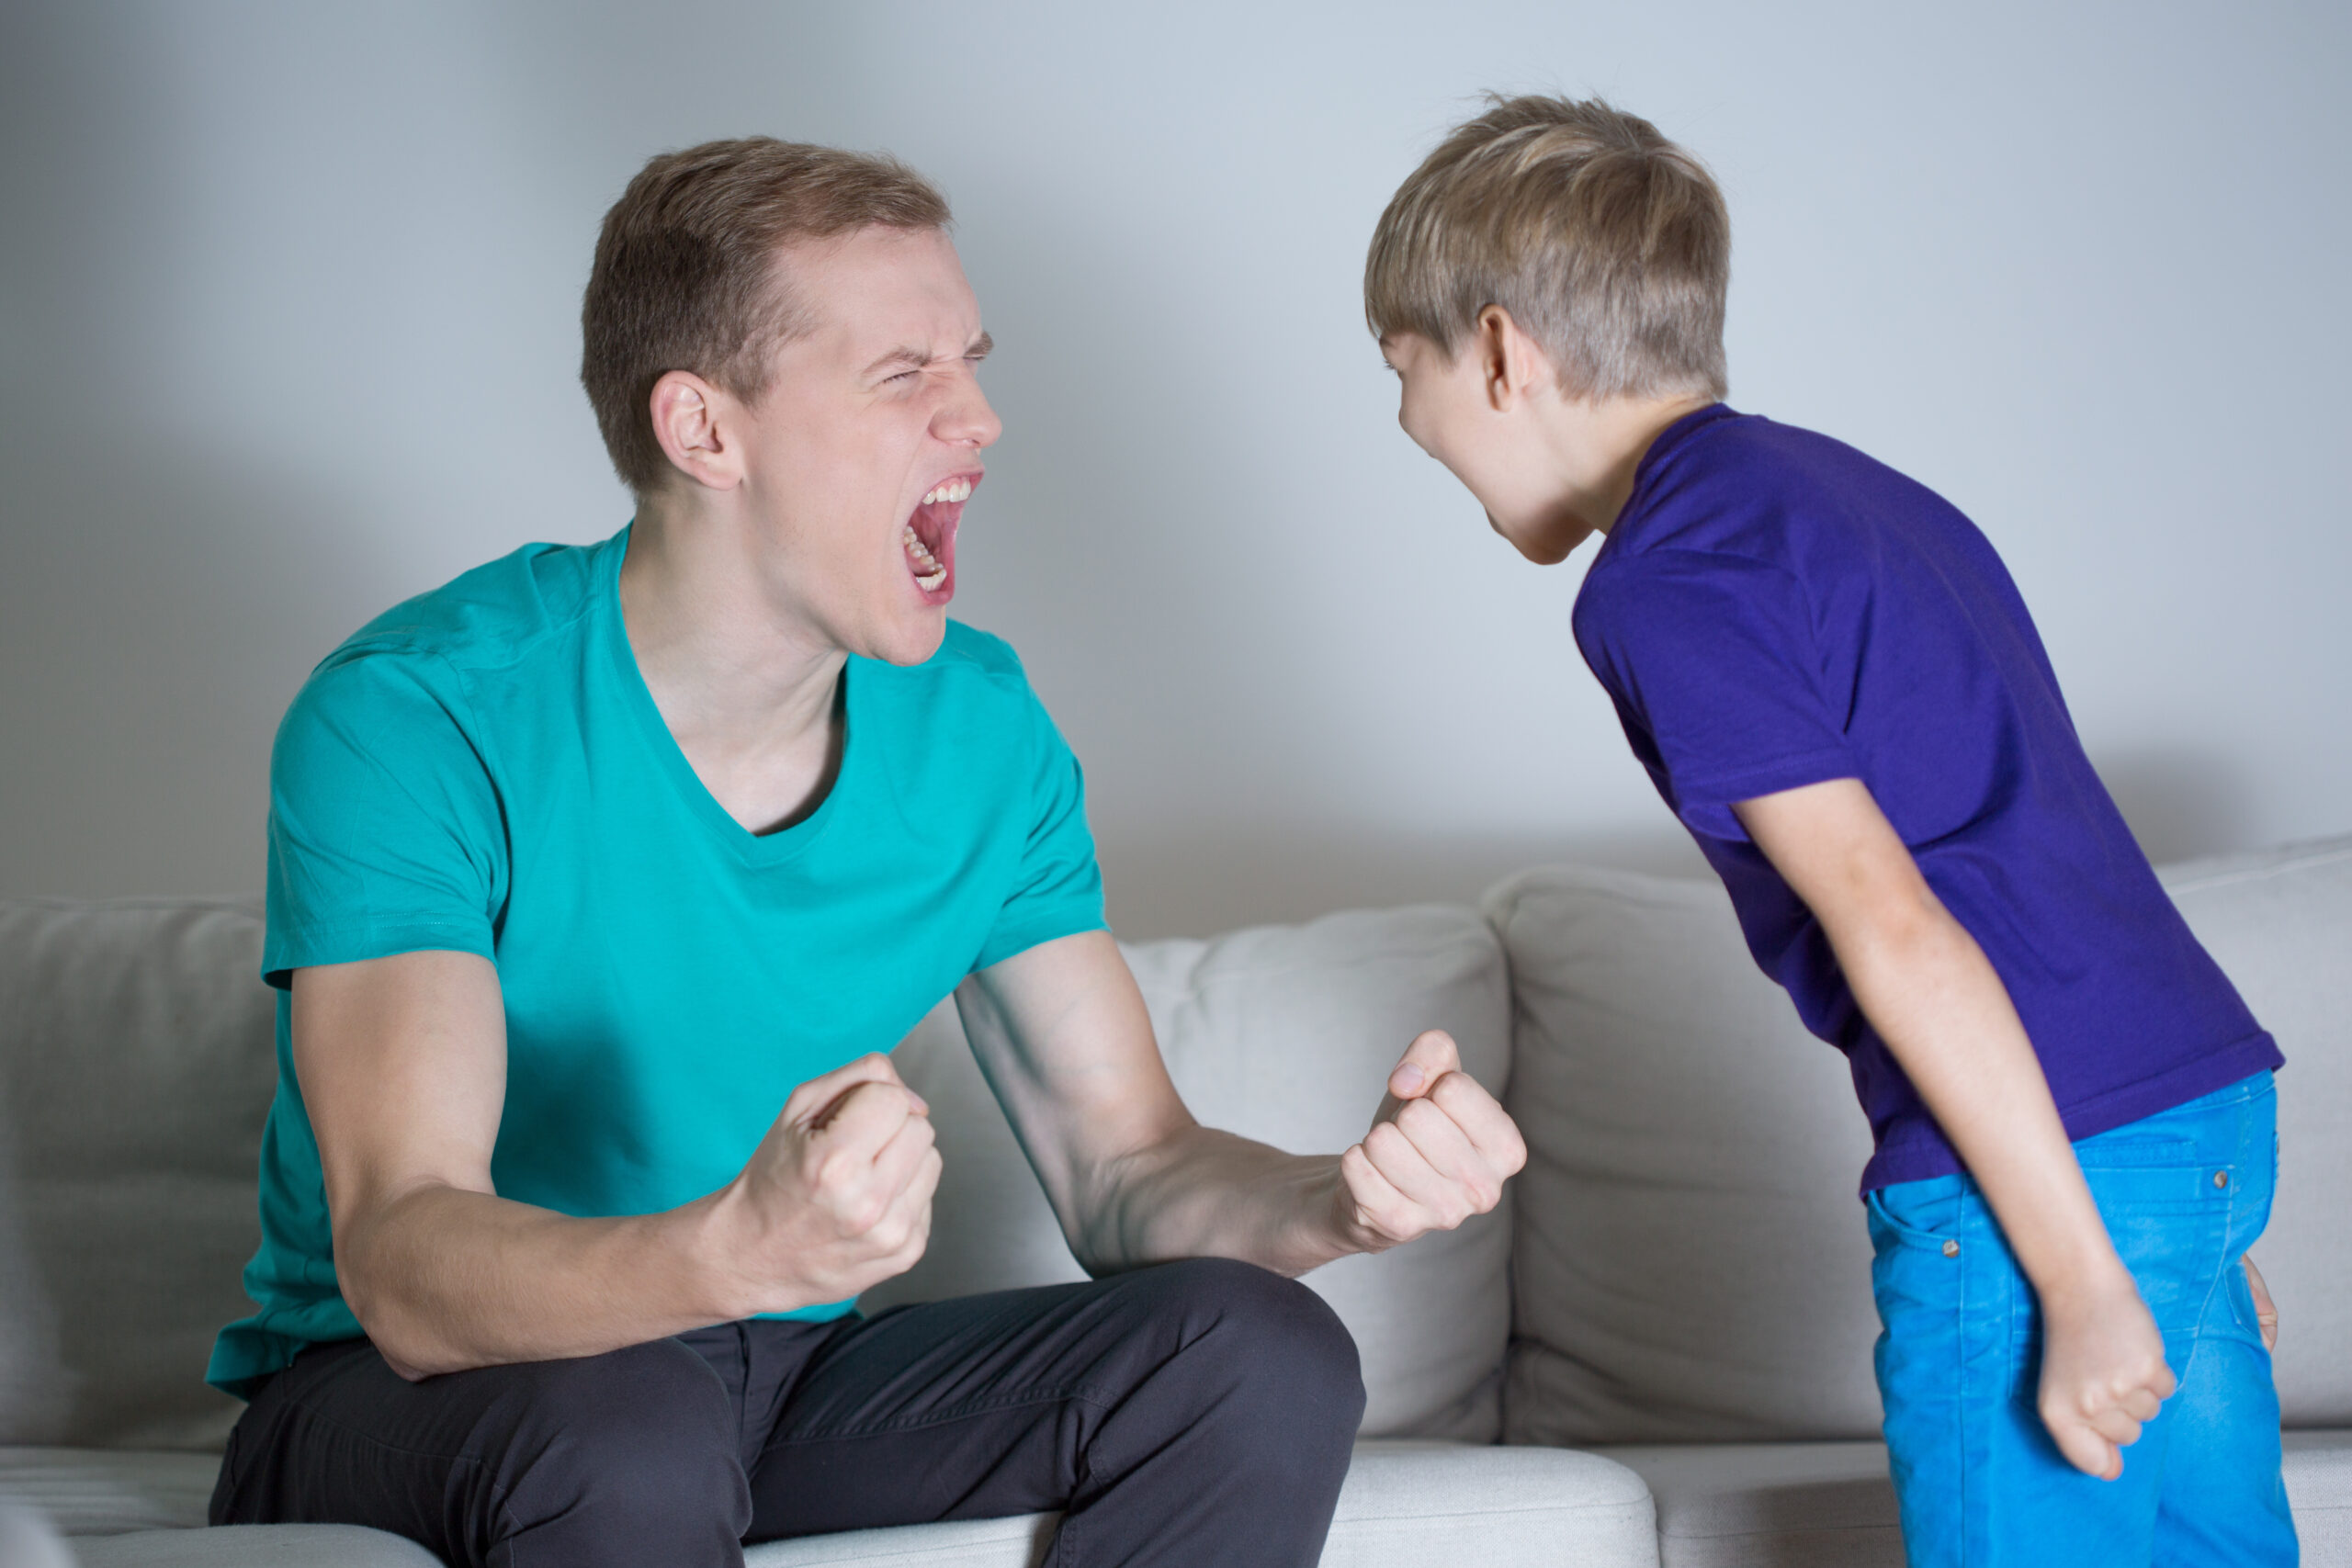 How do I handle it when my child talks back or yells at me when they are mad or being defiant?